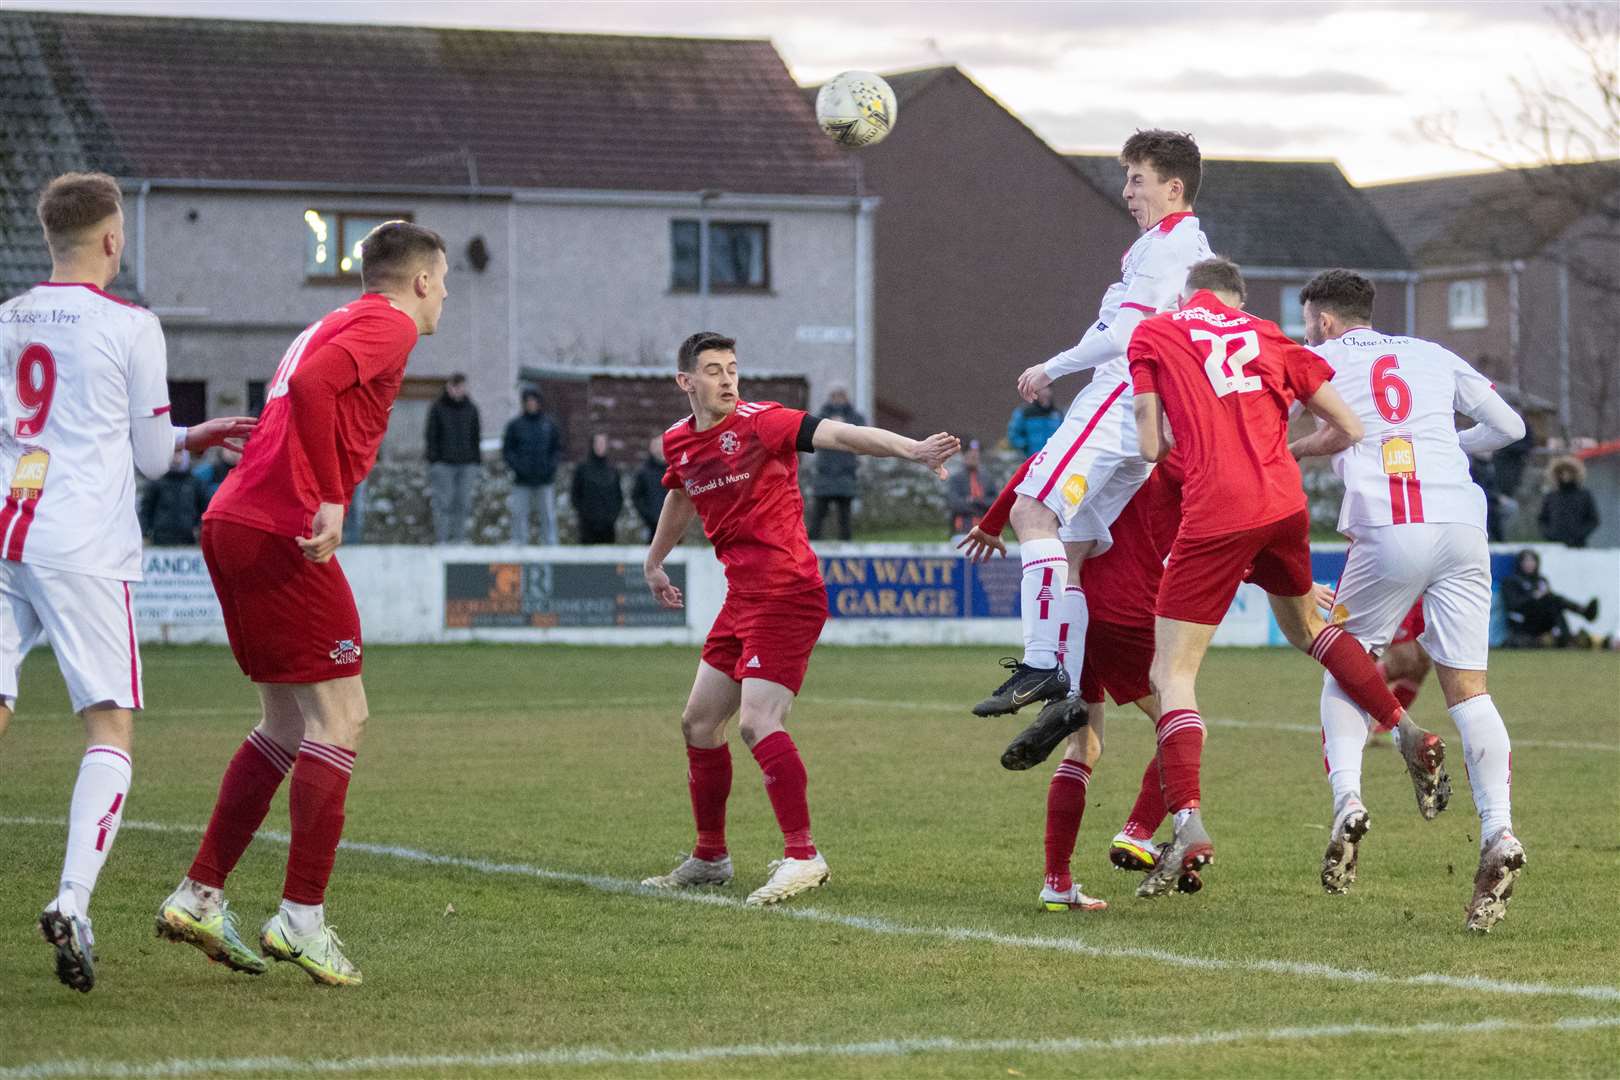 Fraser MacLeod scored Brechin's opener in a 2-0 win at Keith which sets up a title decider at Buckie. Picture: Daniel Forsyth